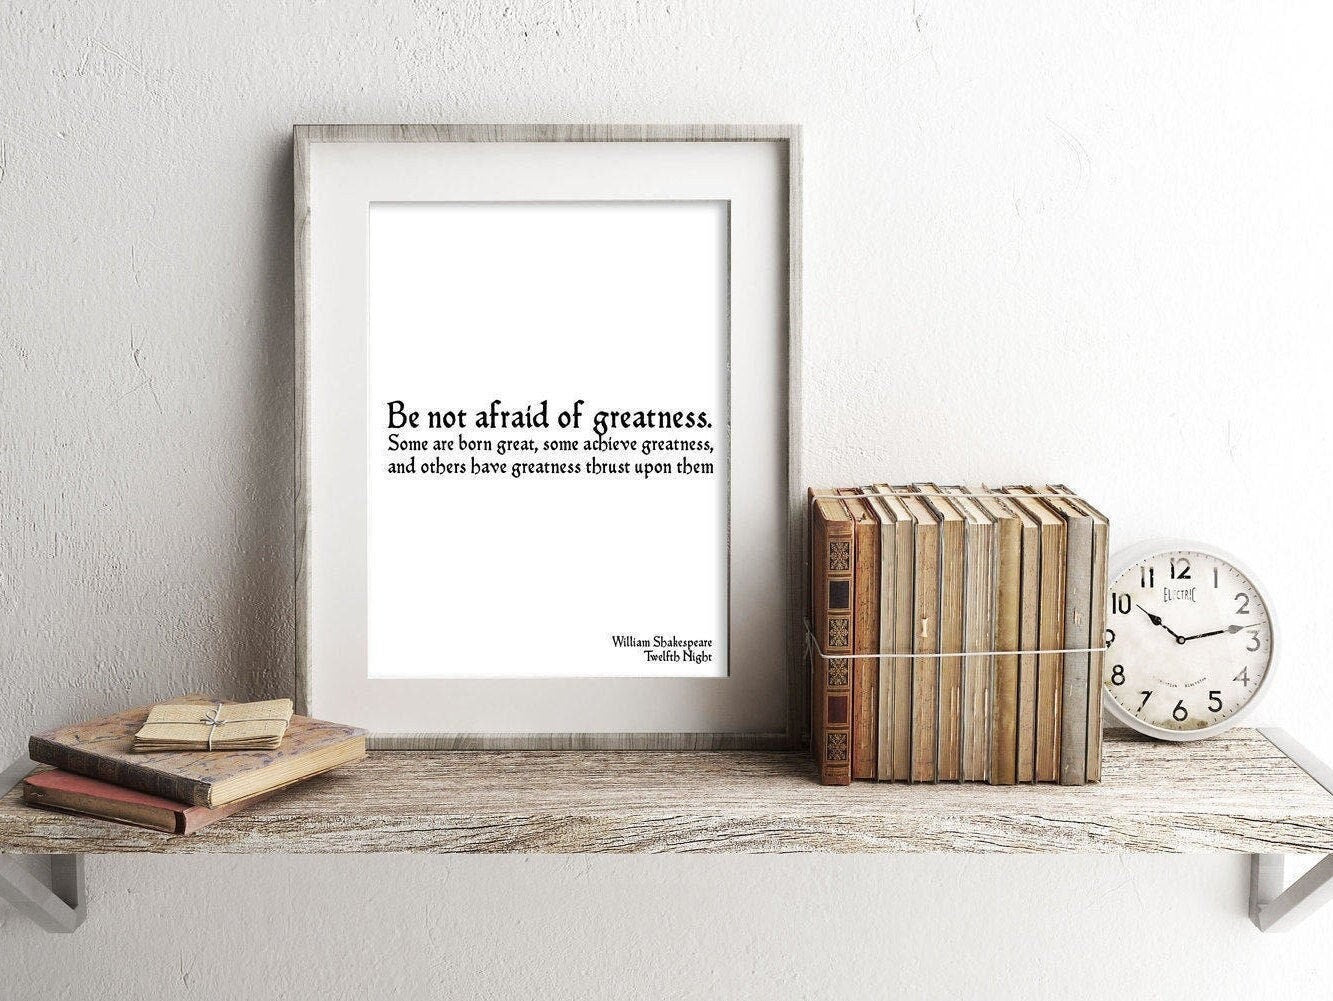 Be Not Afraid Of Greatness William Shakespeare Unframed and Framed Wall Art Prints in Black & White, Twelfth Night